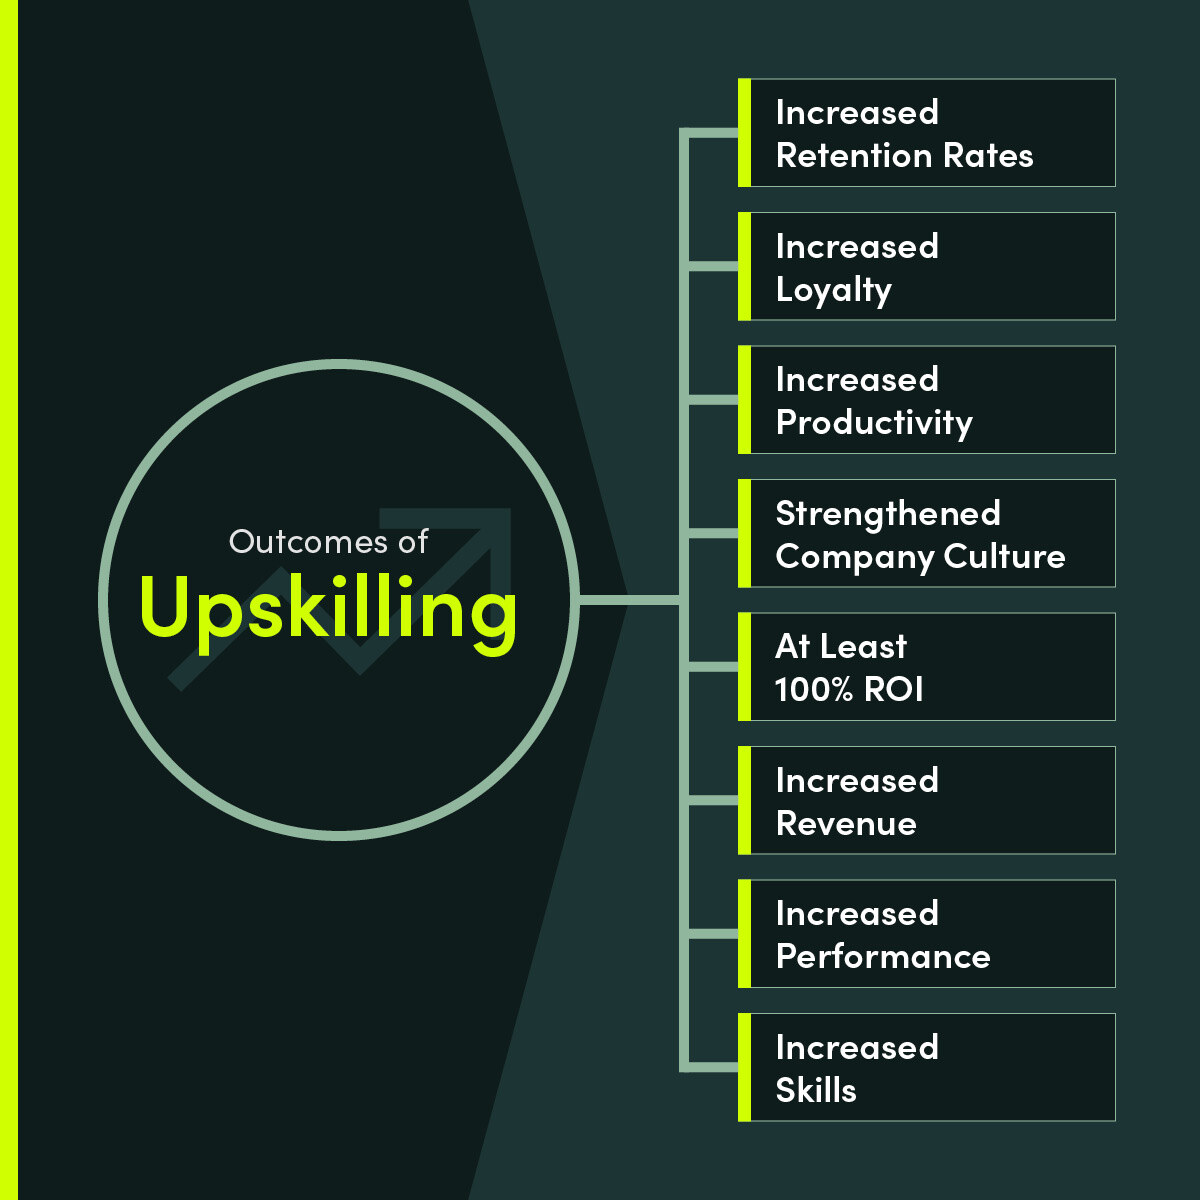 Upskilling turns small businesses into formidable competitors